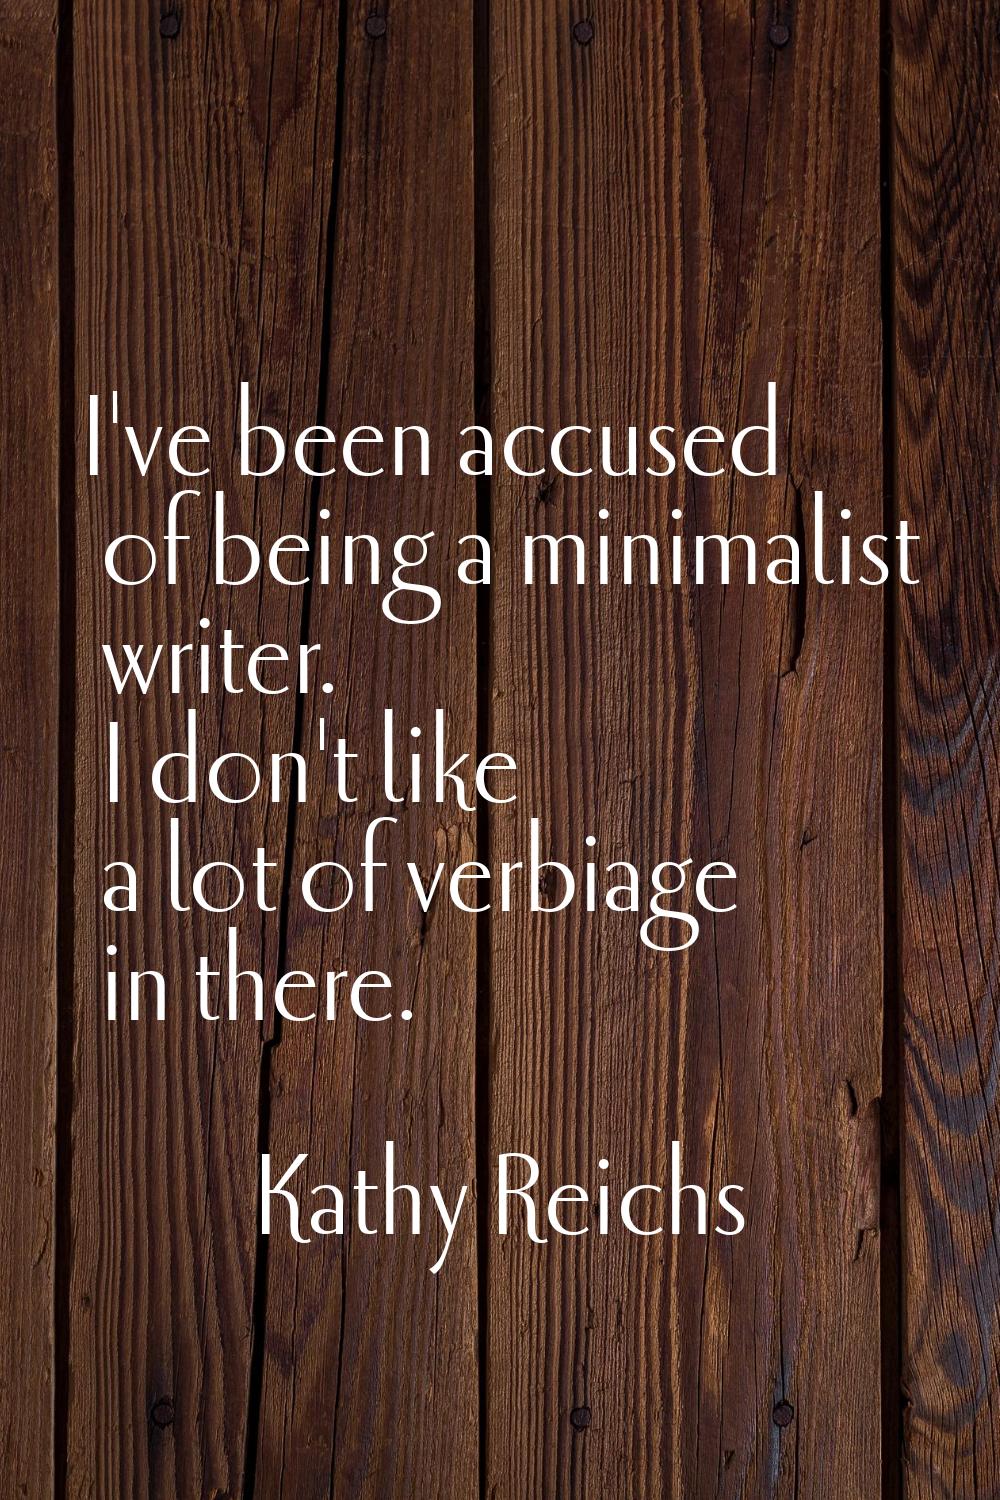 I've been accused of being a minimalist writer. I don't like a lot of verbiage in there.